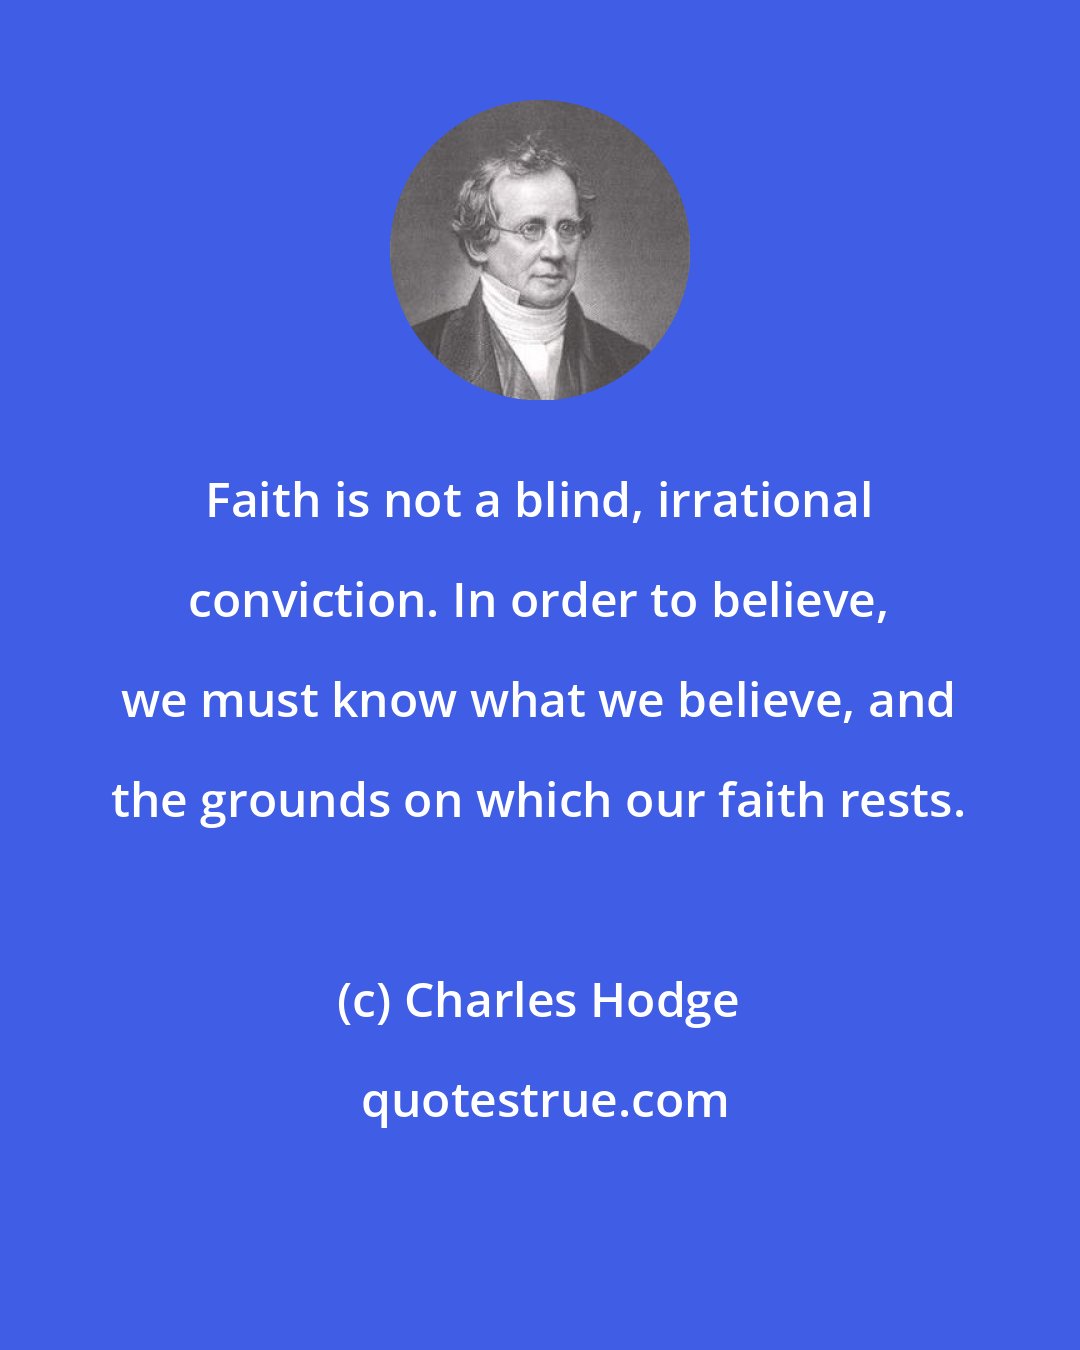 Charles Hodge: Faith is not a blind, irrational conviction. In order to believe, we must know what we believe, and the grounds on which our faith rests.